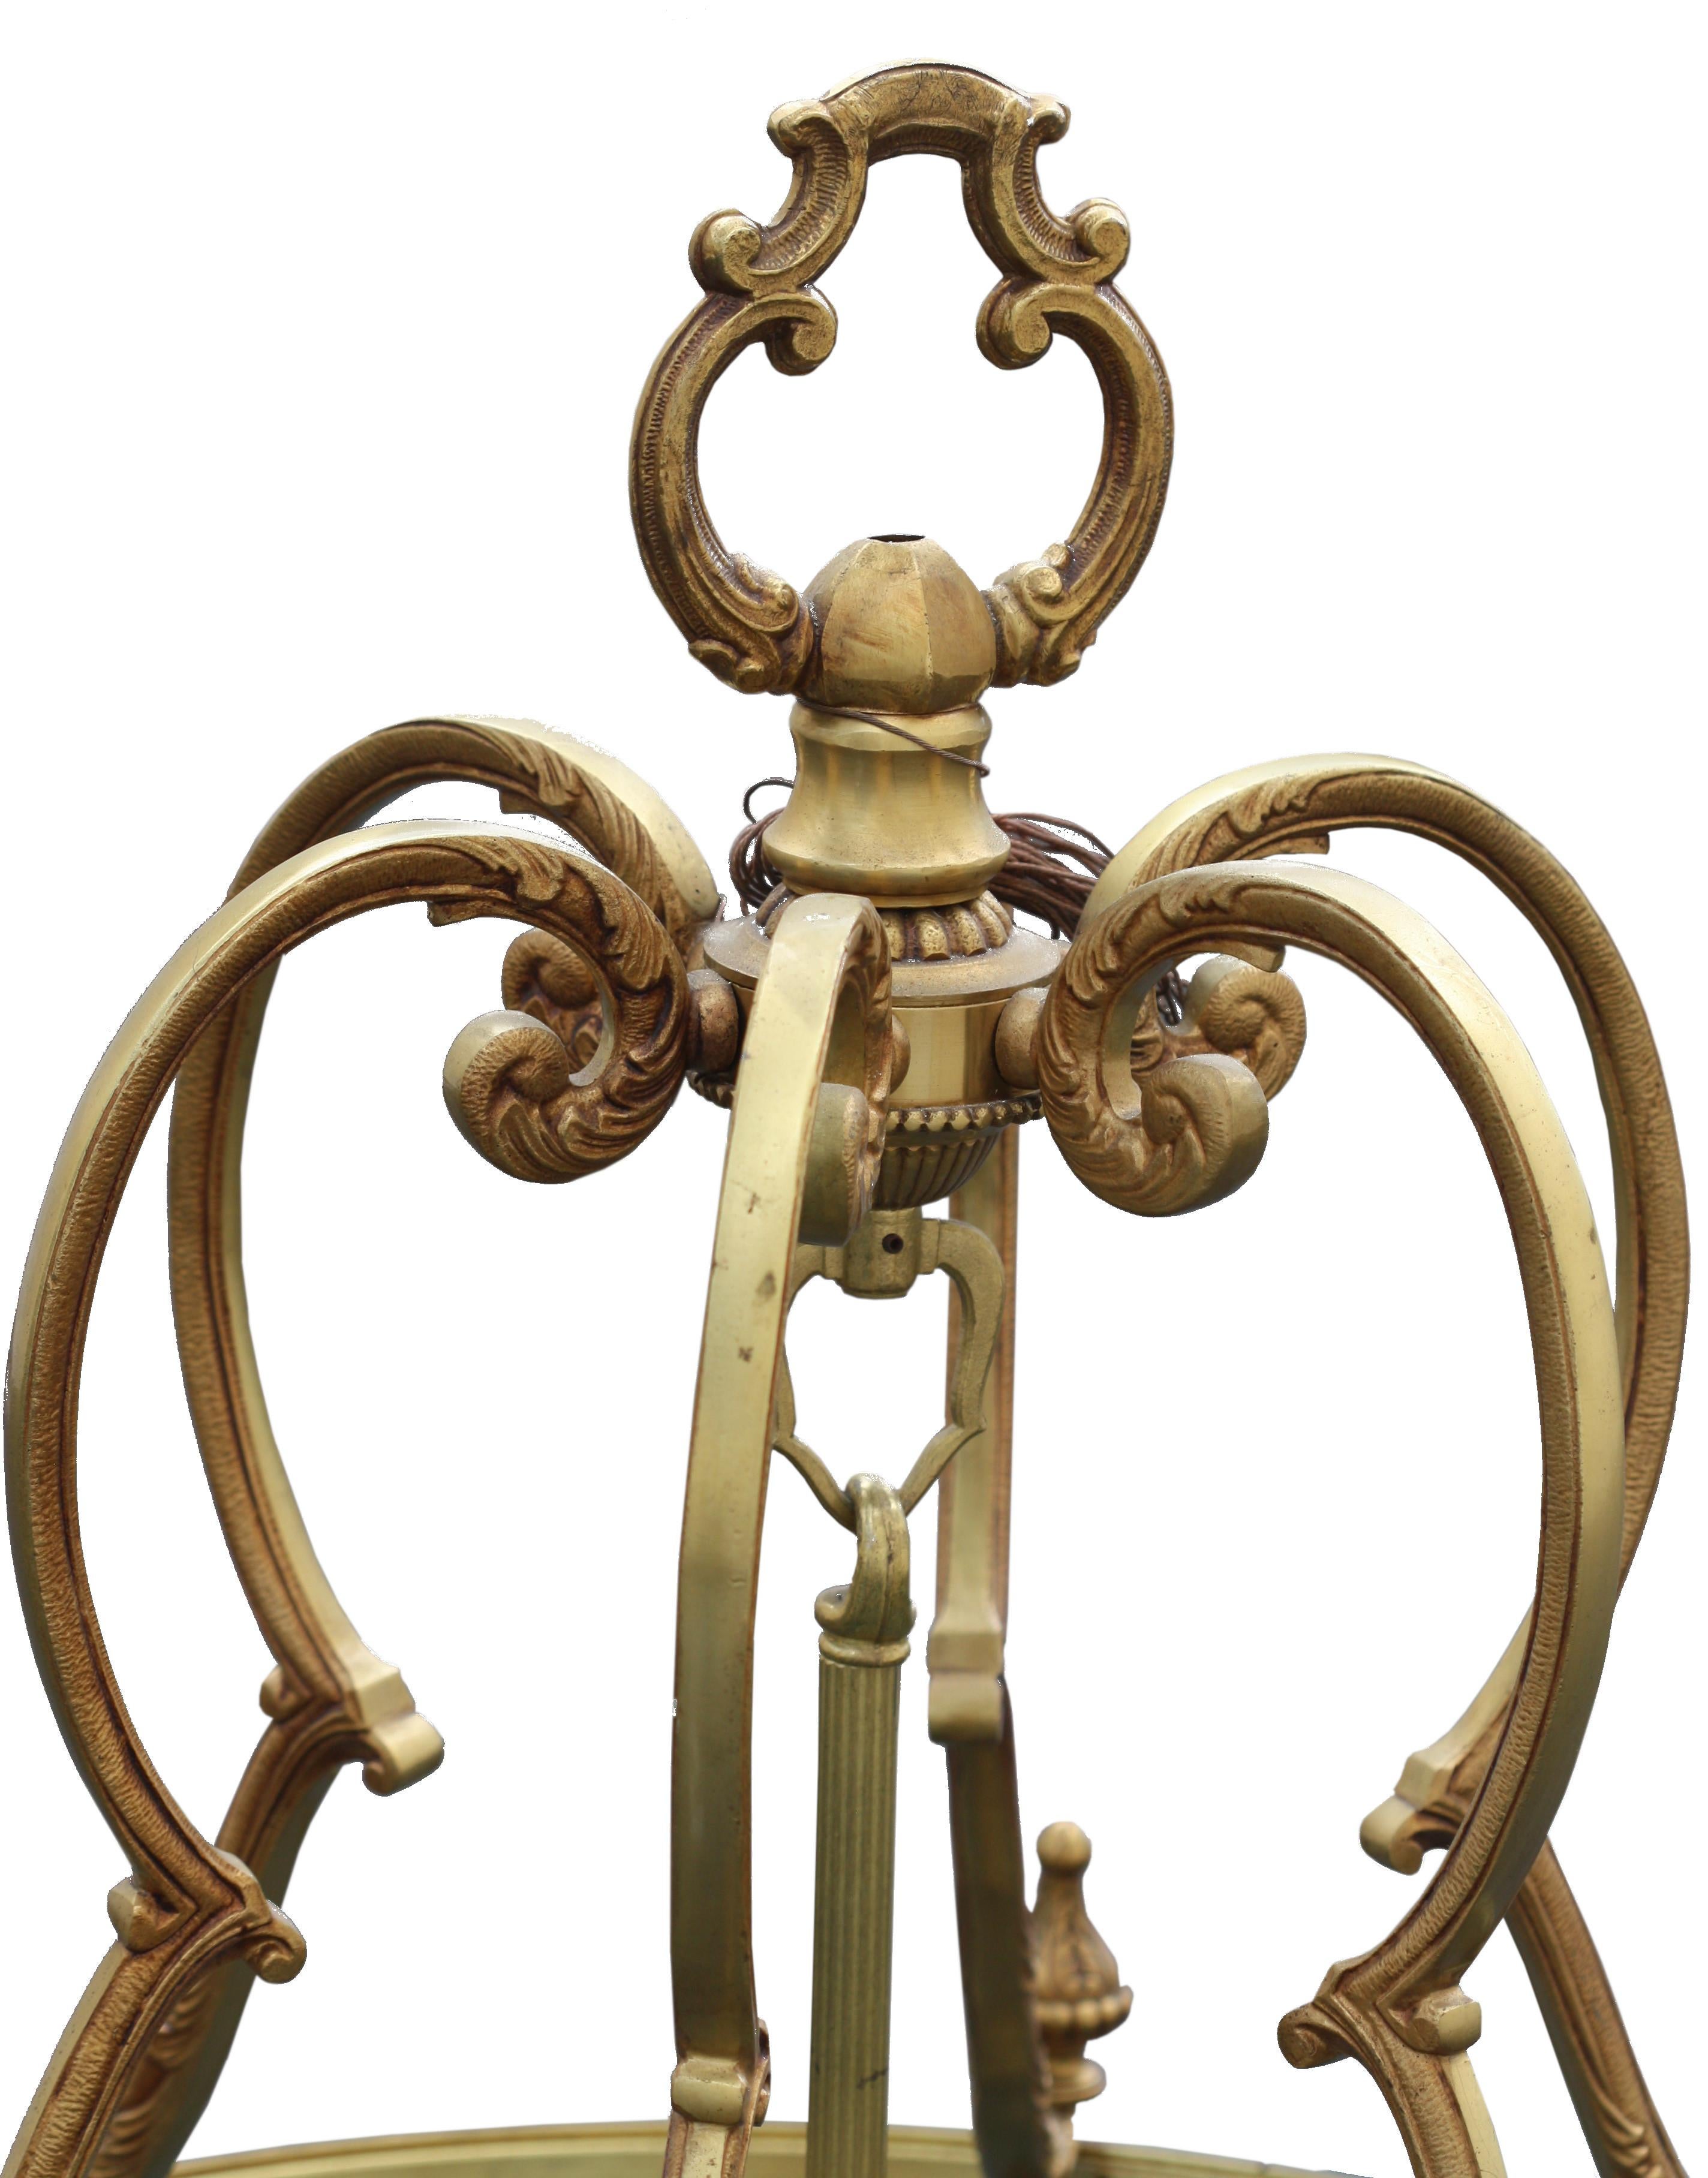 Property removed from Kirk House, Miami
A Louis XV style bronze hanging lantern/chandelier
20th century
of circular form with shaped glass sides, nine-light inner chandelier
Measures: 117cm. high, 48cm. wide; 3ft. 10in.